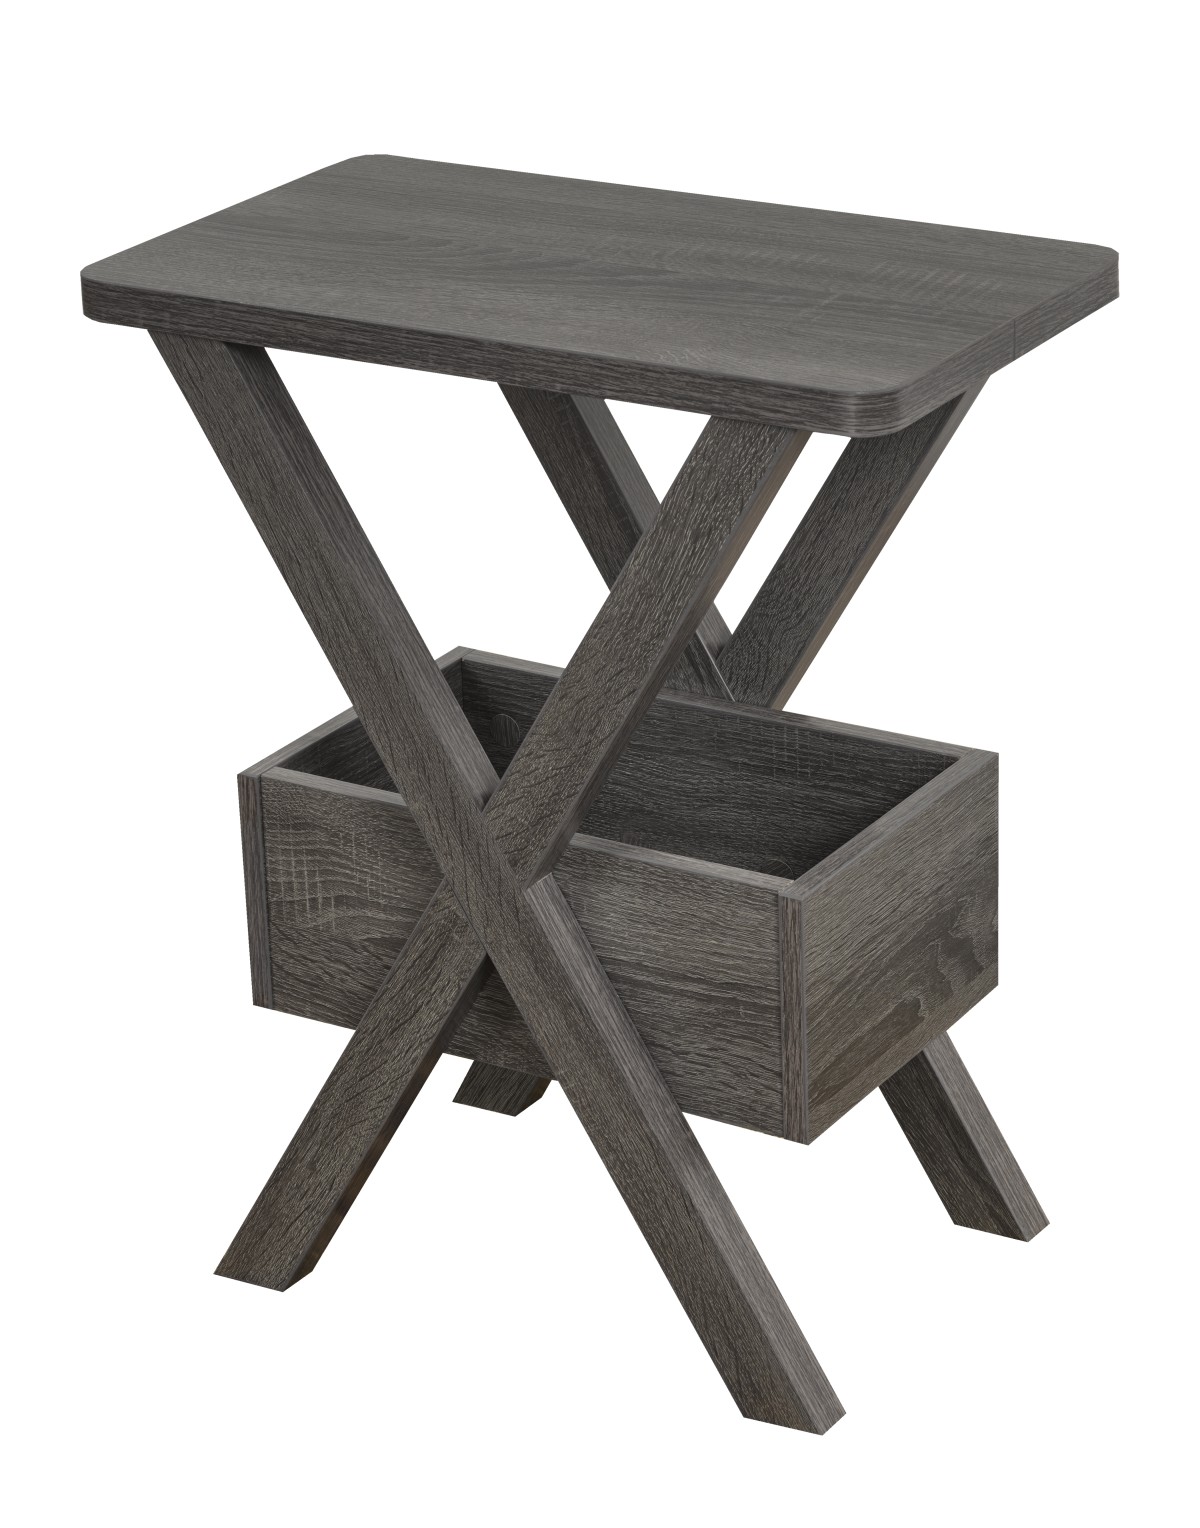 CHAIR SIDE TABLE - GREY